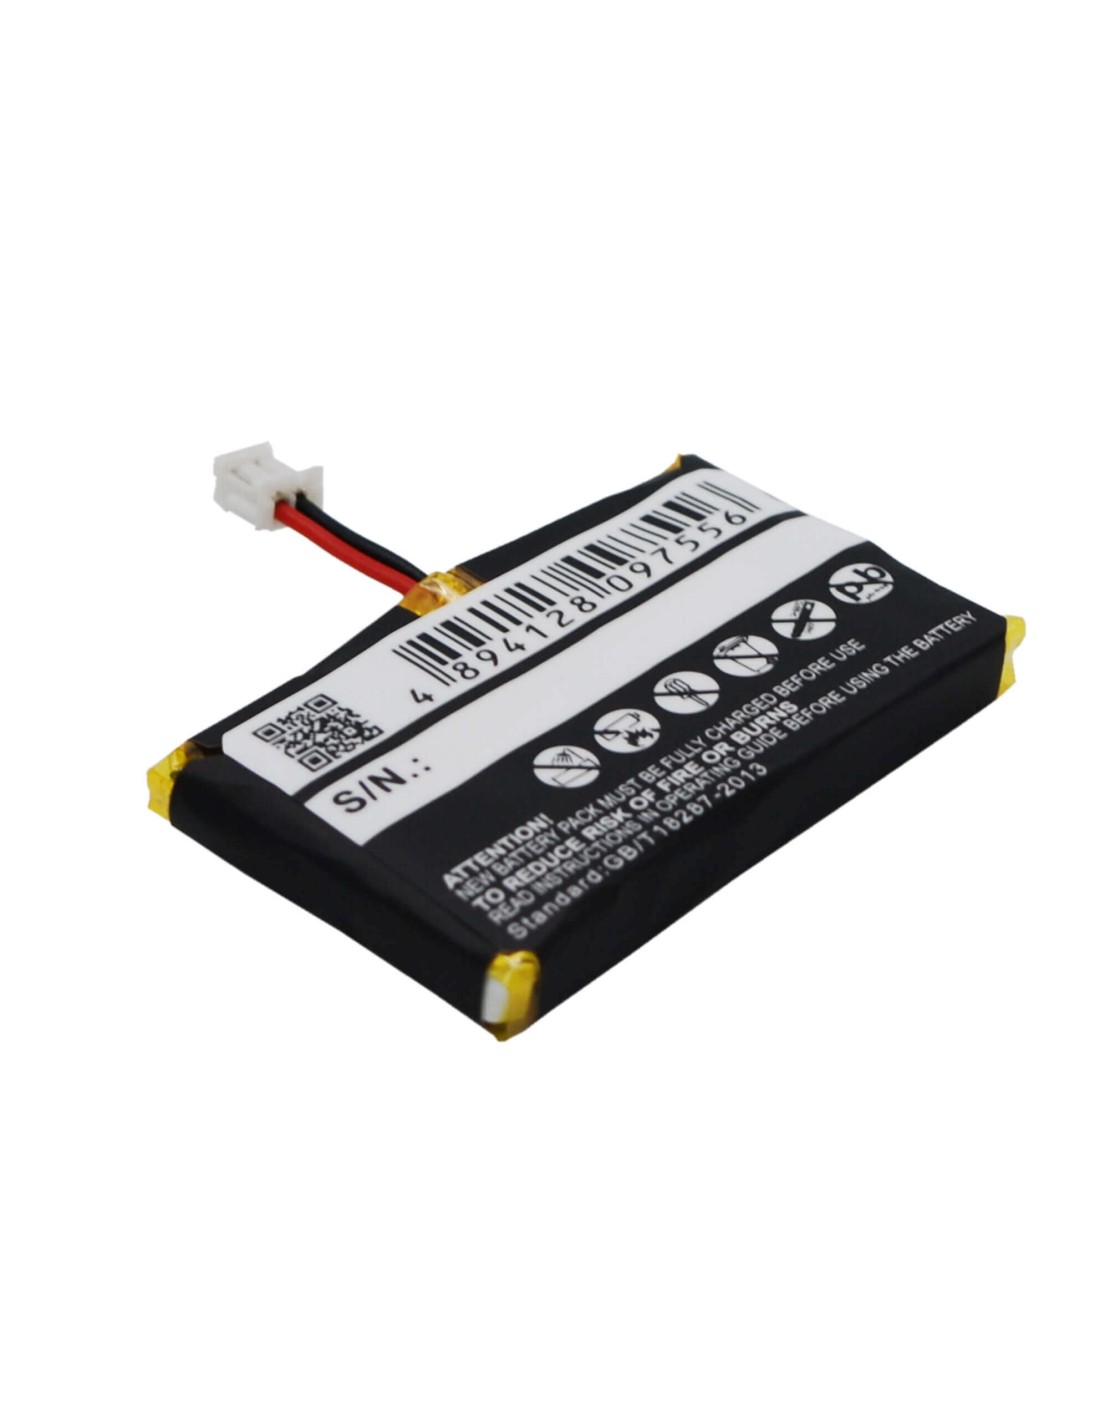 Battery for Sportdog Sd-1225 Trainer Receiver, Sd-1825 Trainer Receiver, Sd-2525 Trainer Receiver 7.4V, 200mAh - 1.48Wh